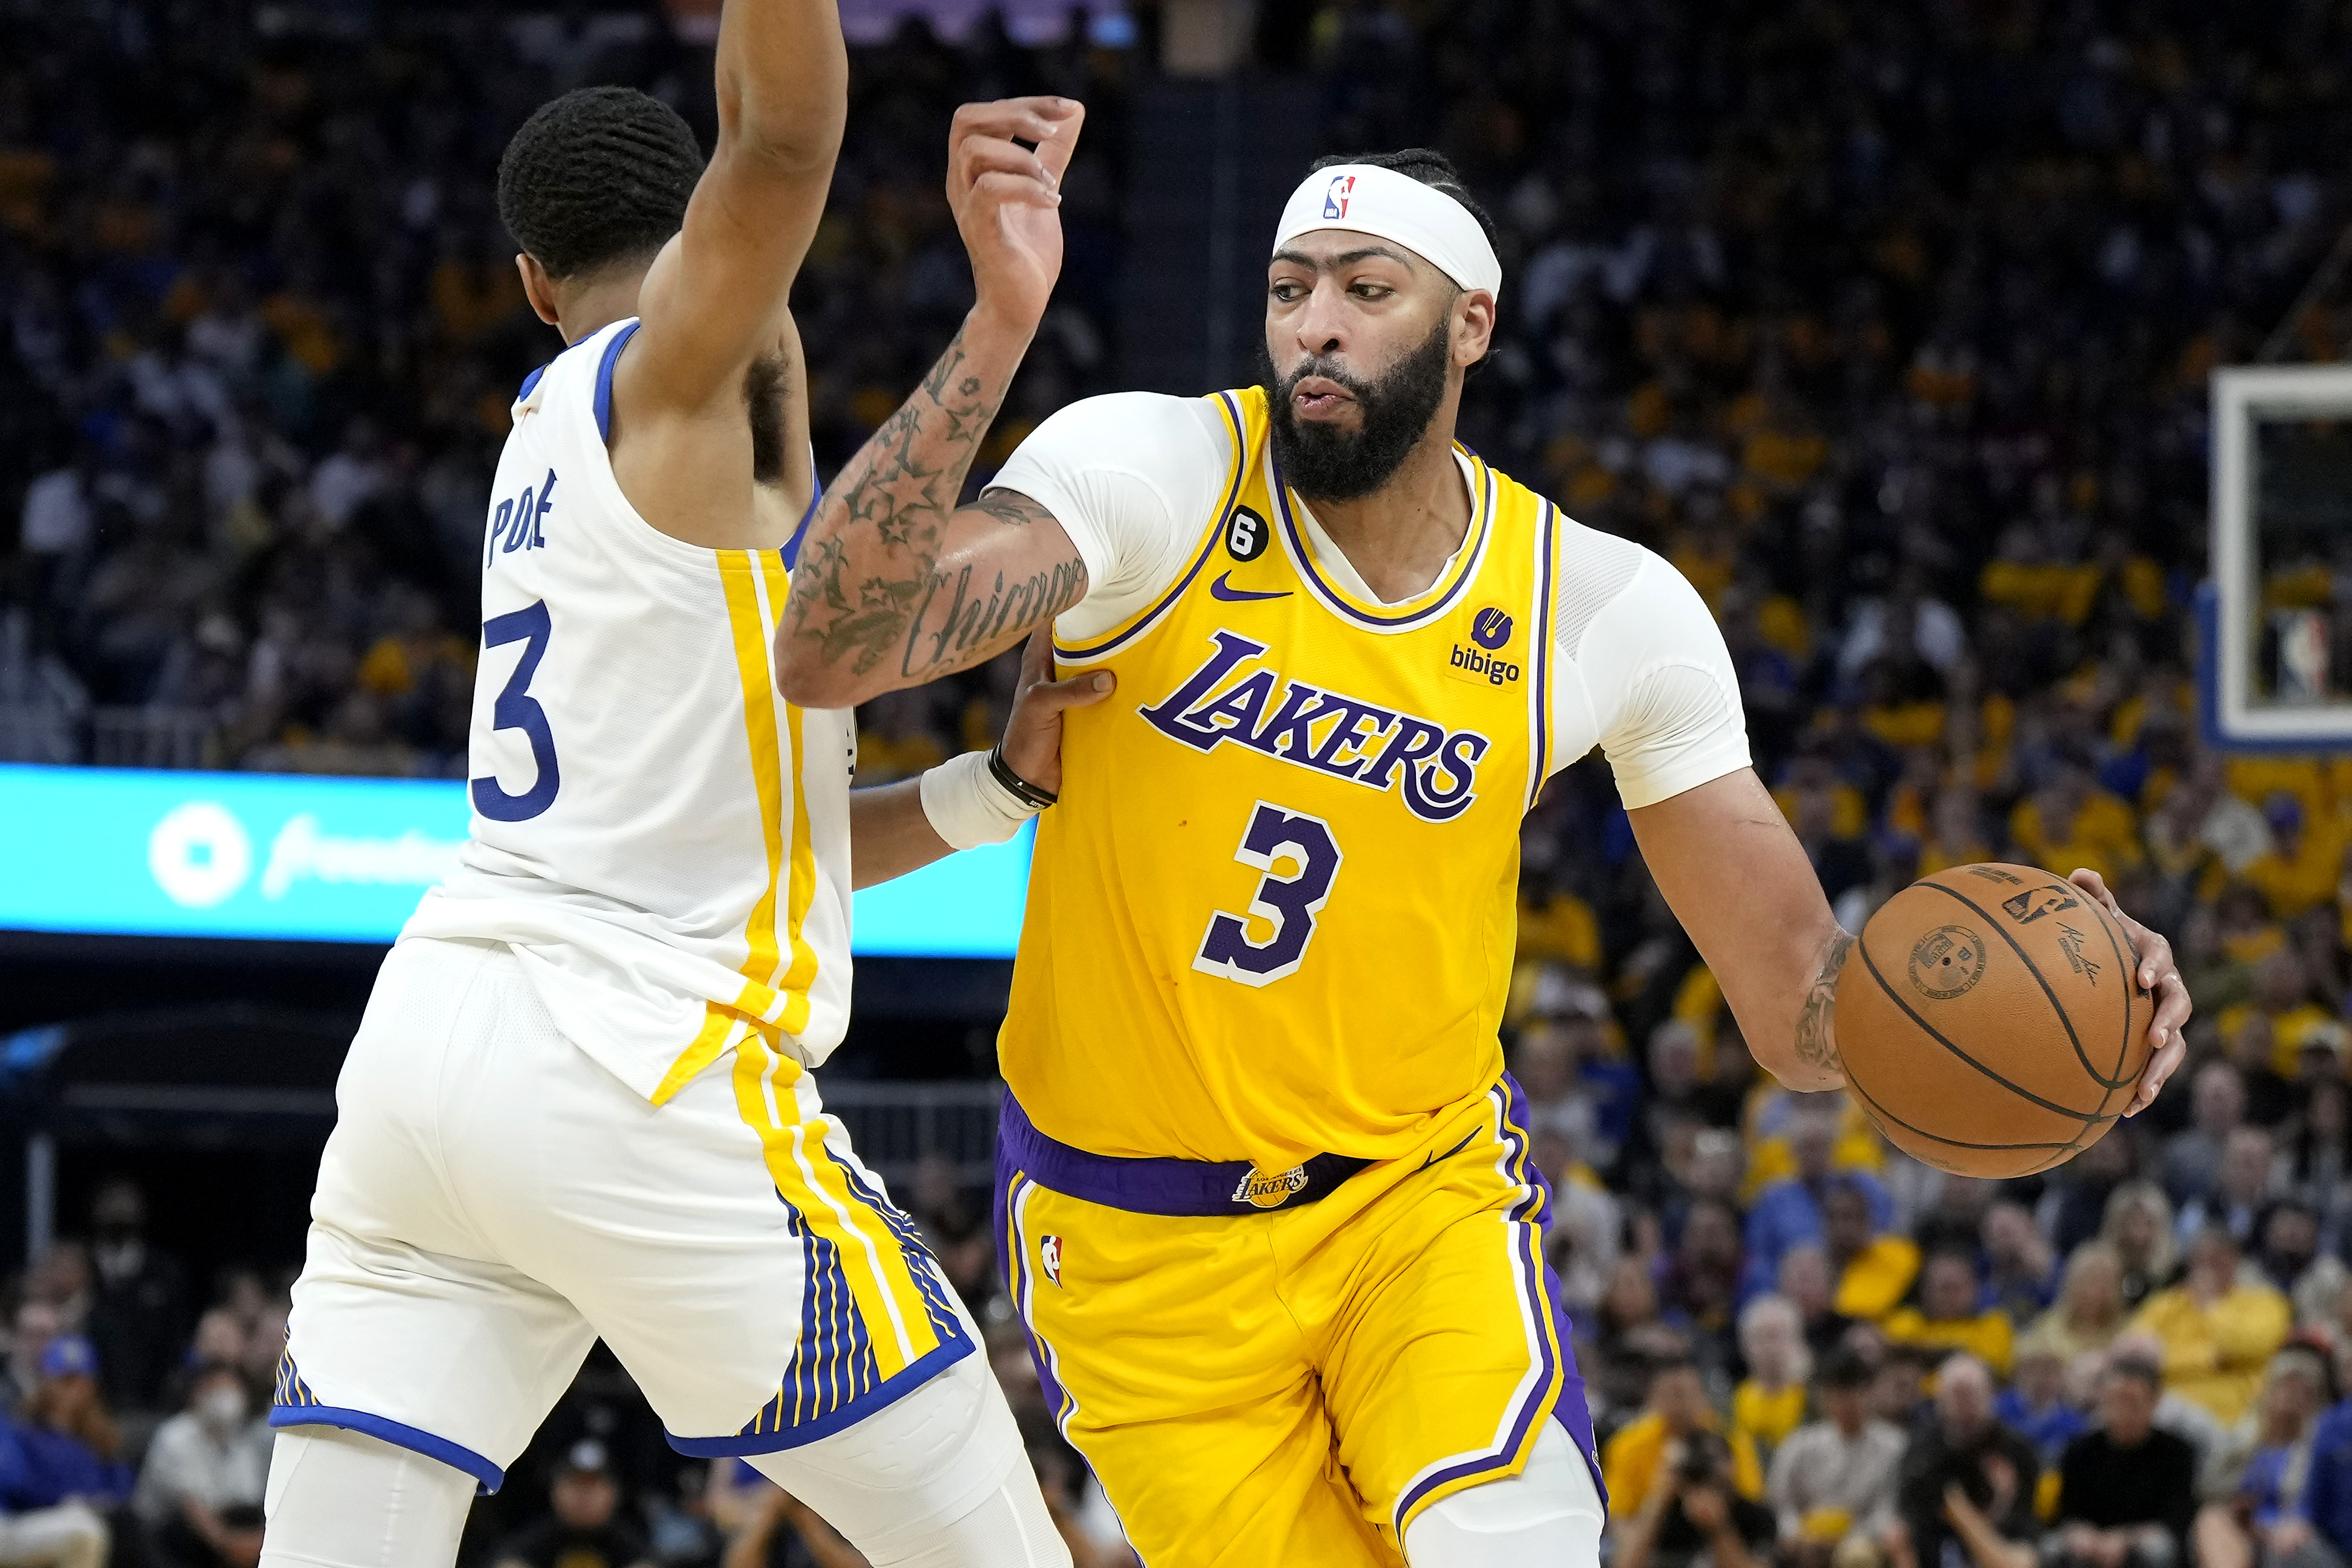 Lakers will beat Warriors if Anthony Davis, LeBron replicate Game 3